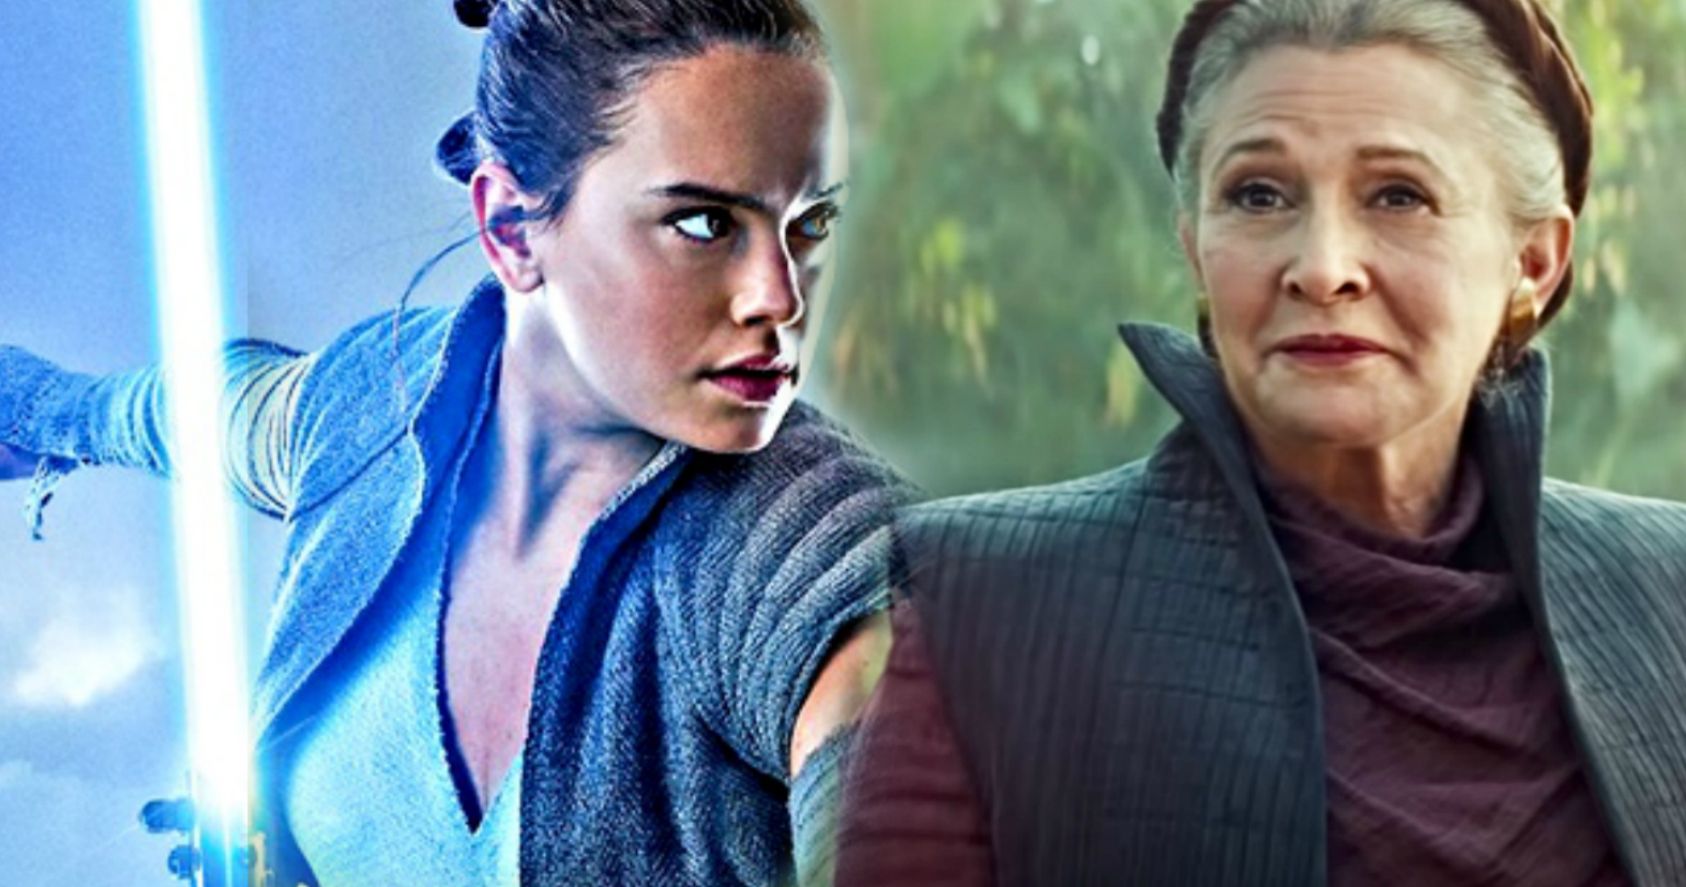 Rumored Rise of Skywalker Opening Scene Is Very Different from Previous Sequels